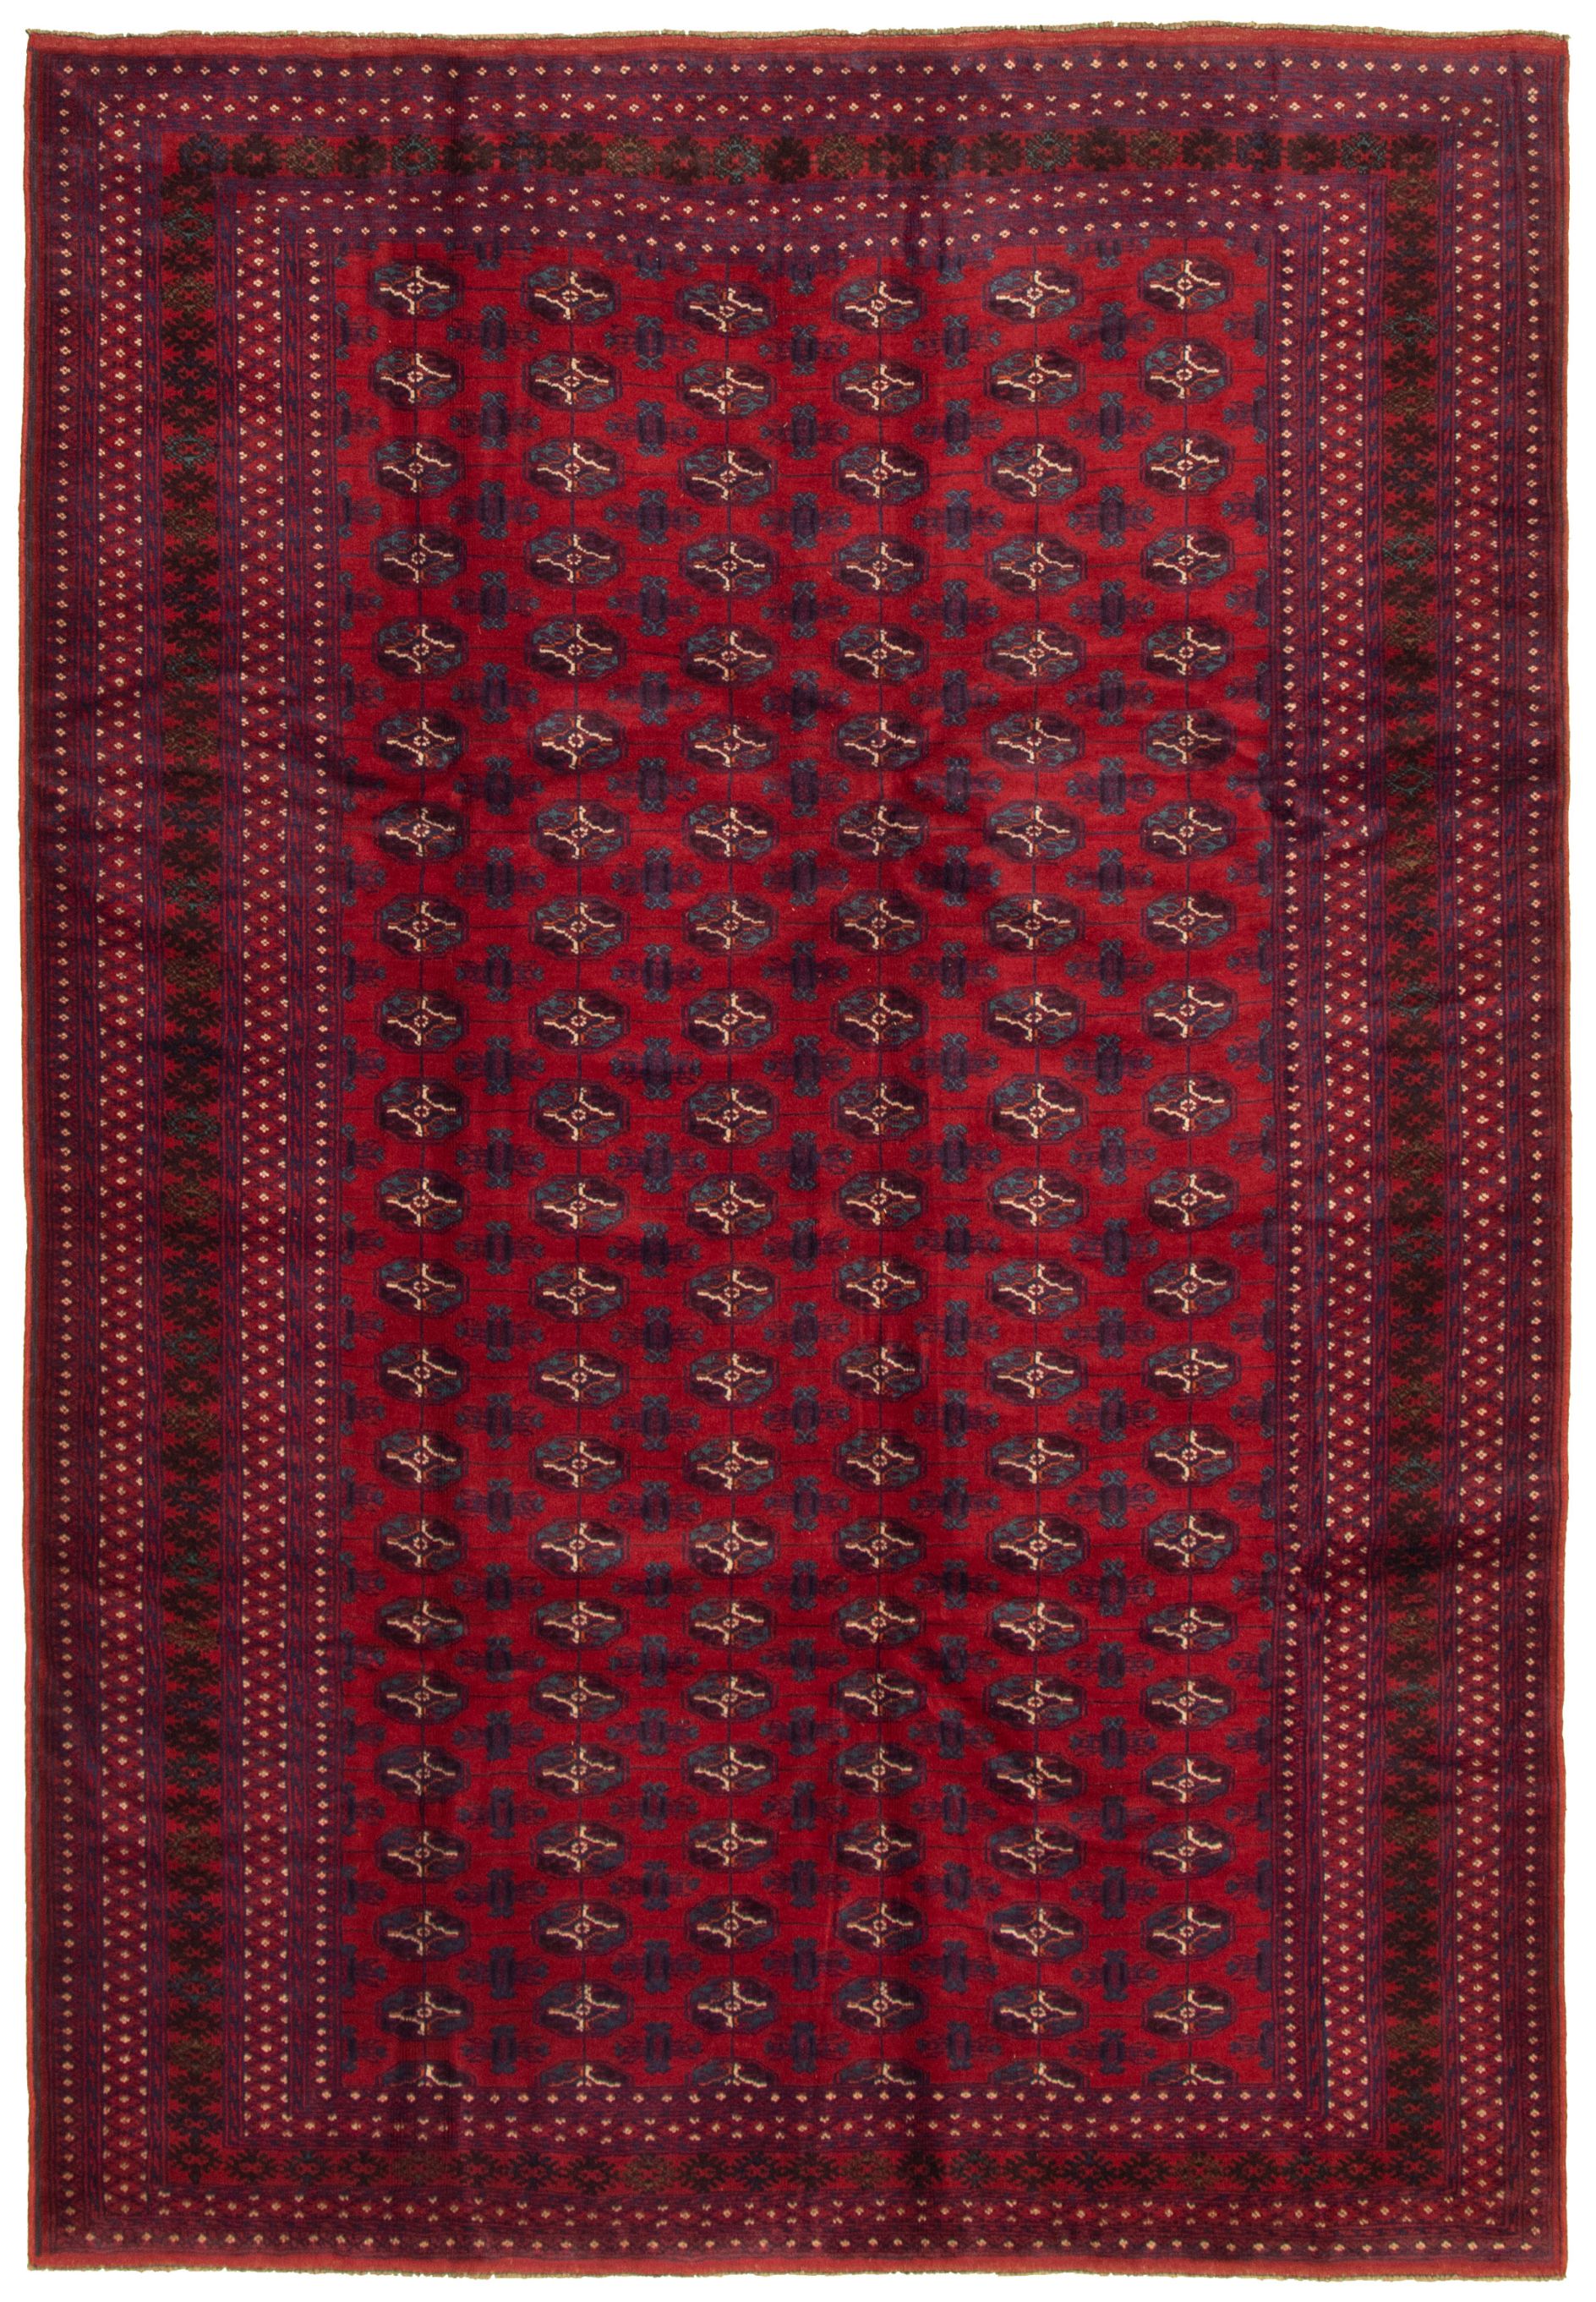 Hand-knotted Rizbaft Red Wool Rug 6'8" x 9'5"  Size: 6'8" x 9'5"  